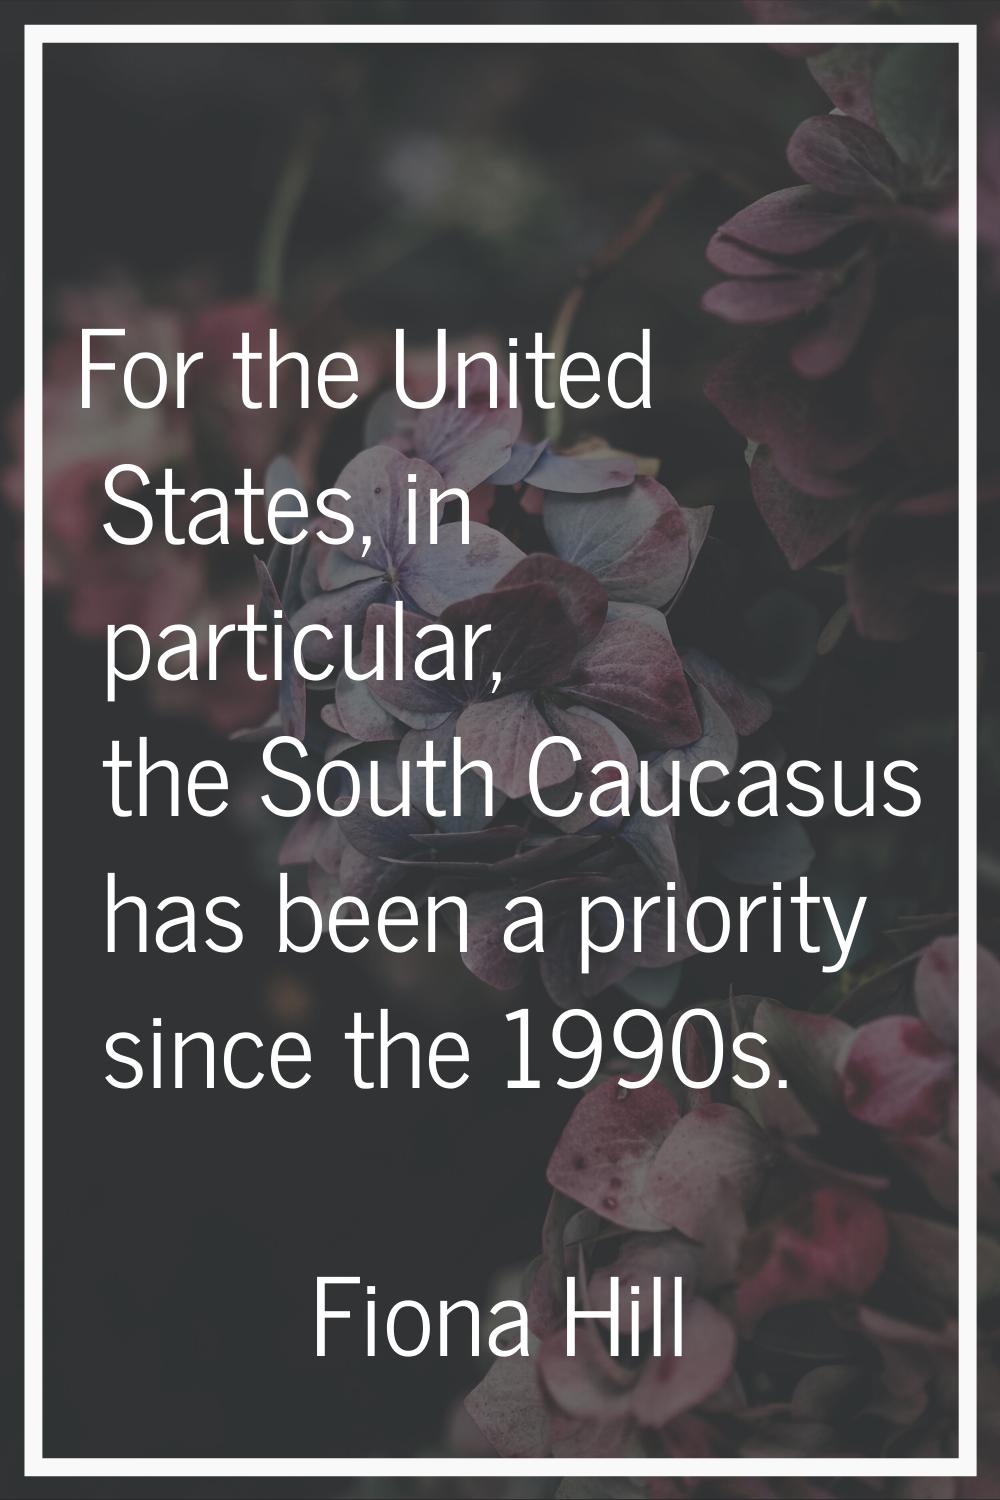 For the United States, in particular, the South Caucasus has been a priority since the 1990s.